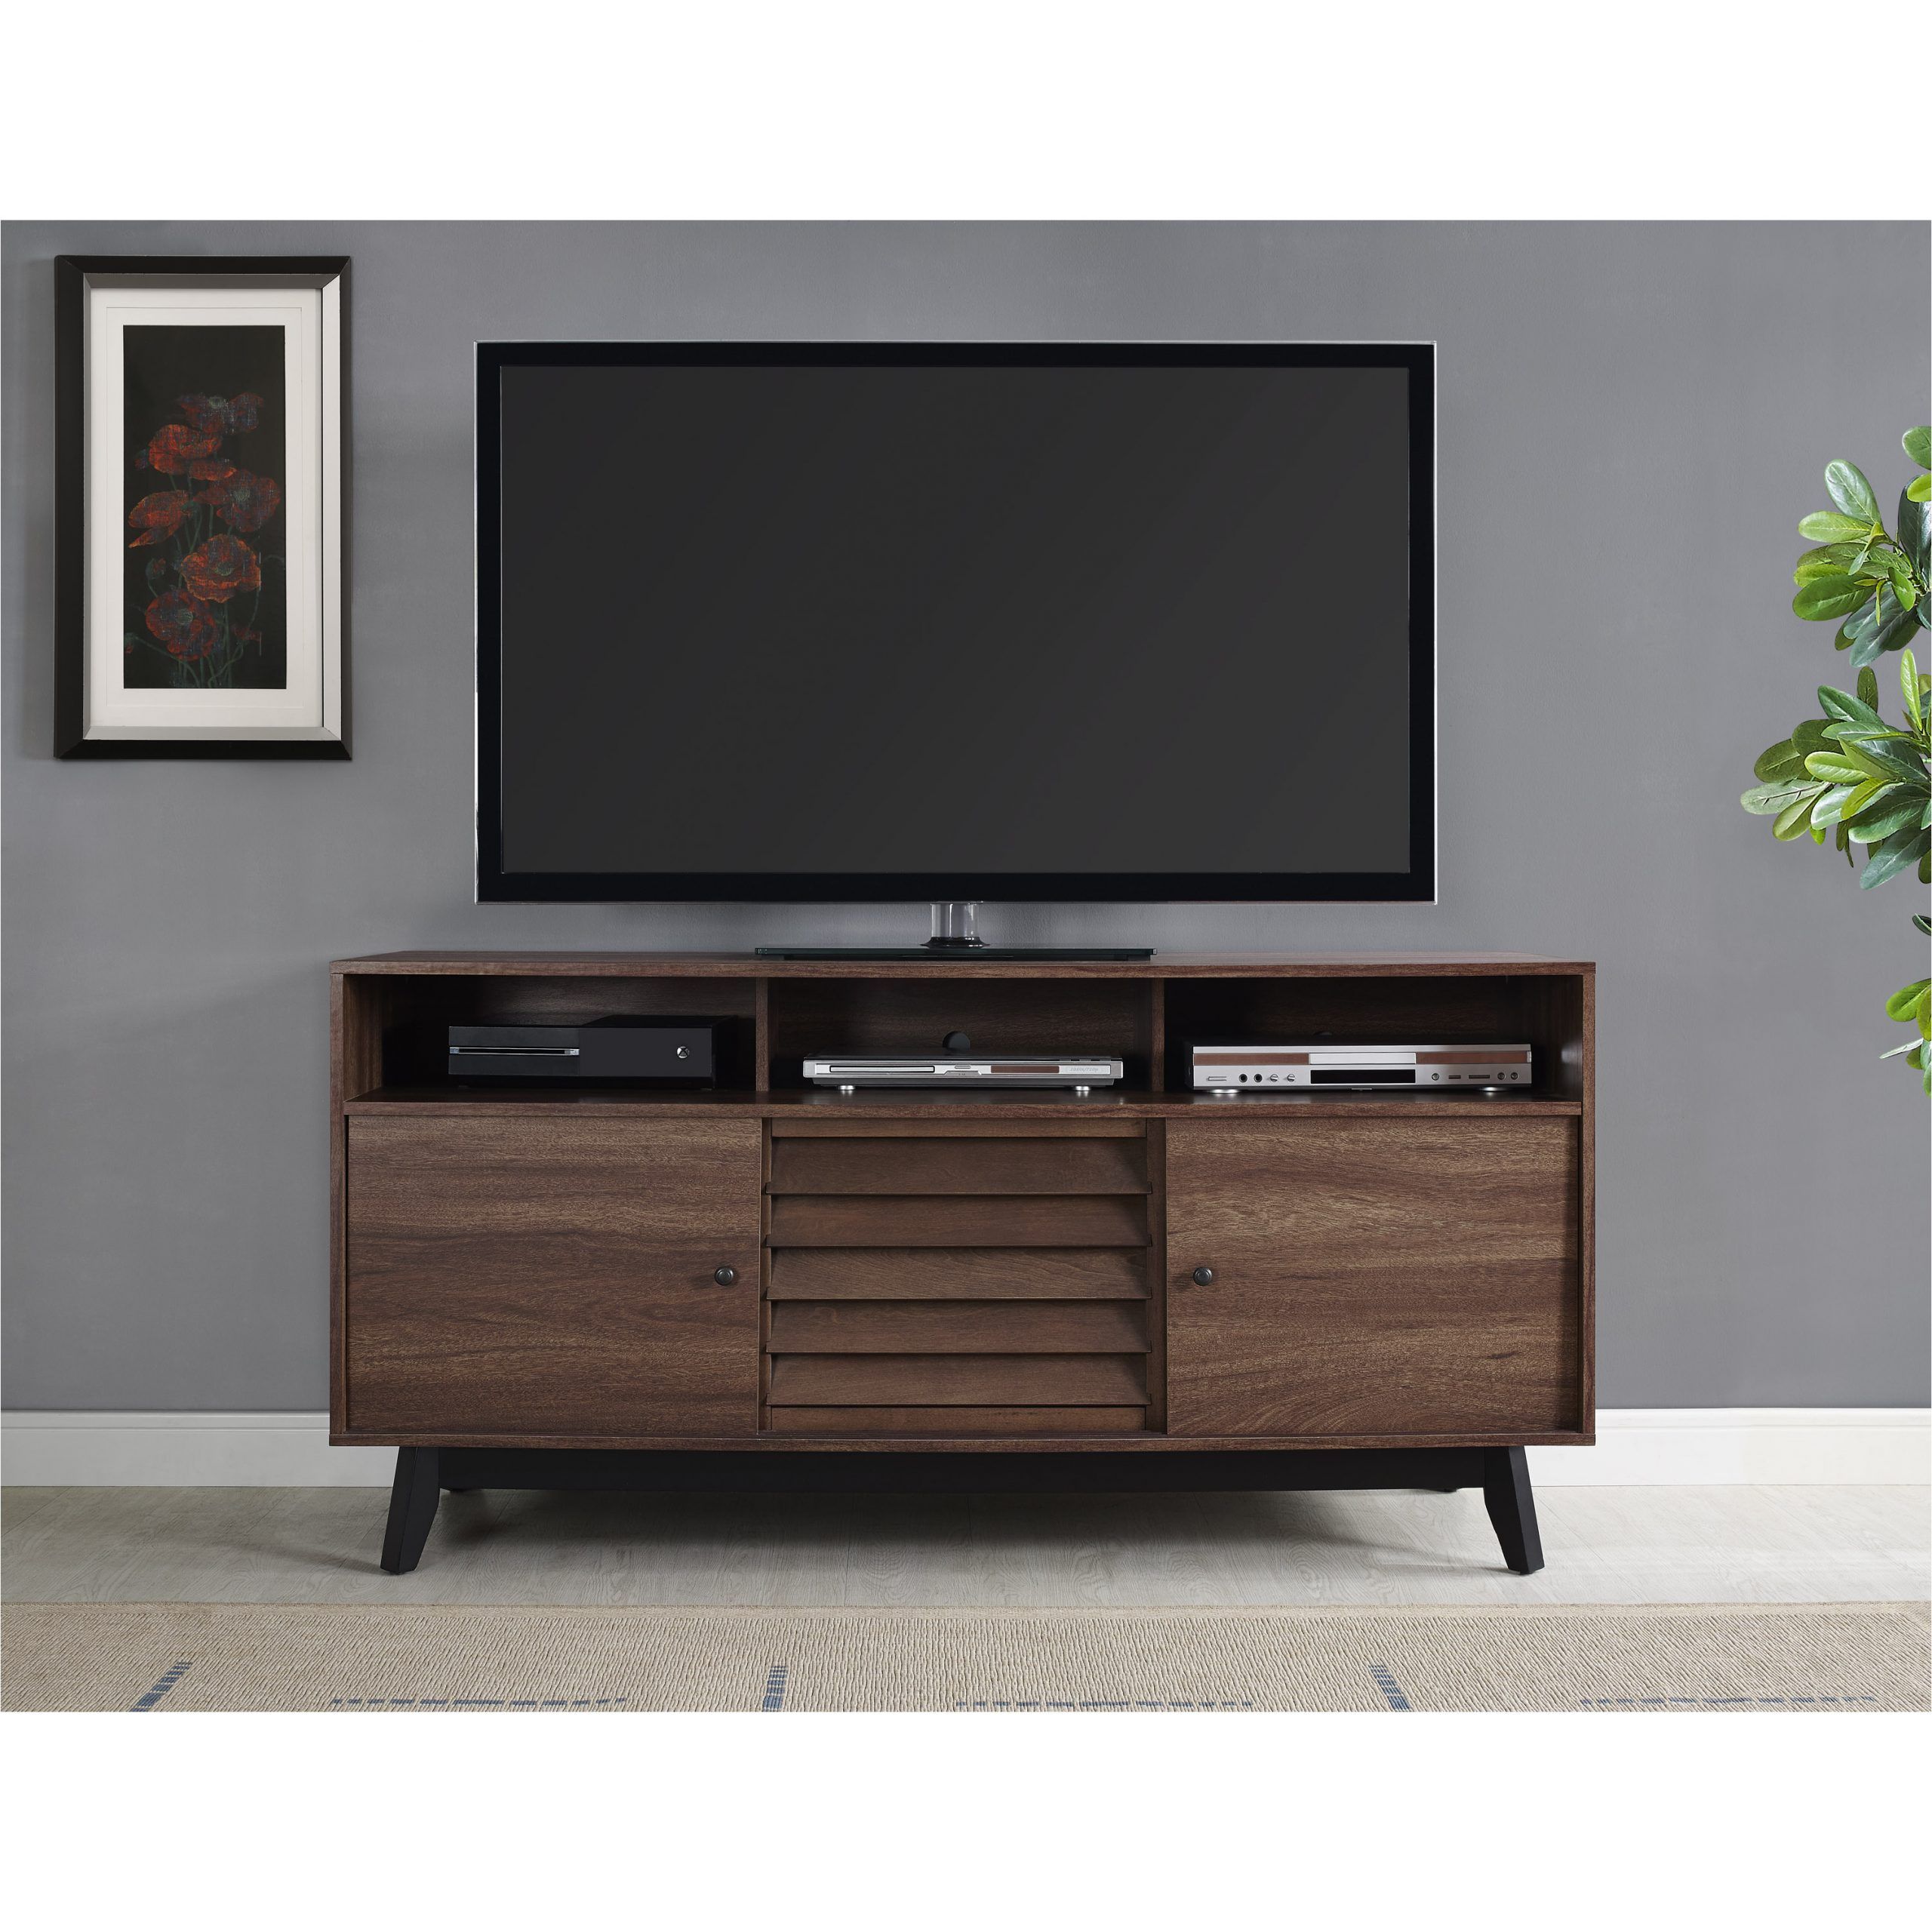 Dorel Home Products Dorel Vaughn Tv Stand (60") Grey Oak For Whittier Tv Stands For Tvs Up To 60" (View 11 of 15)